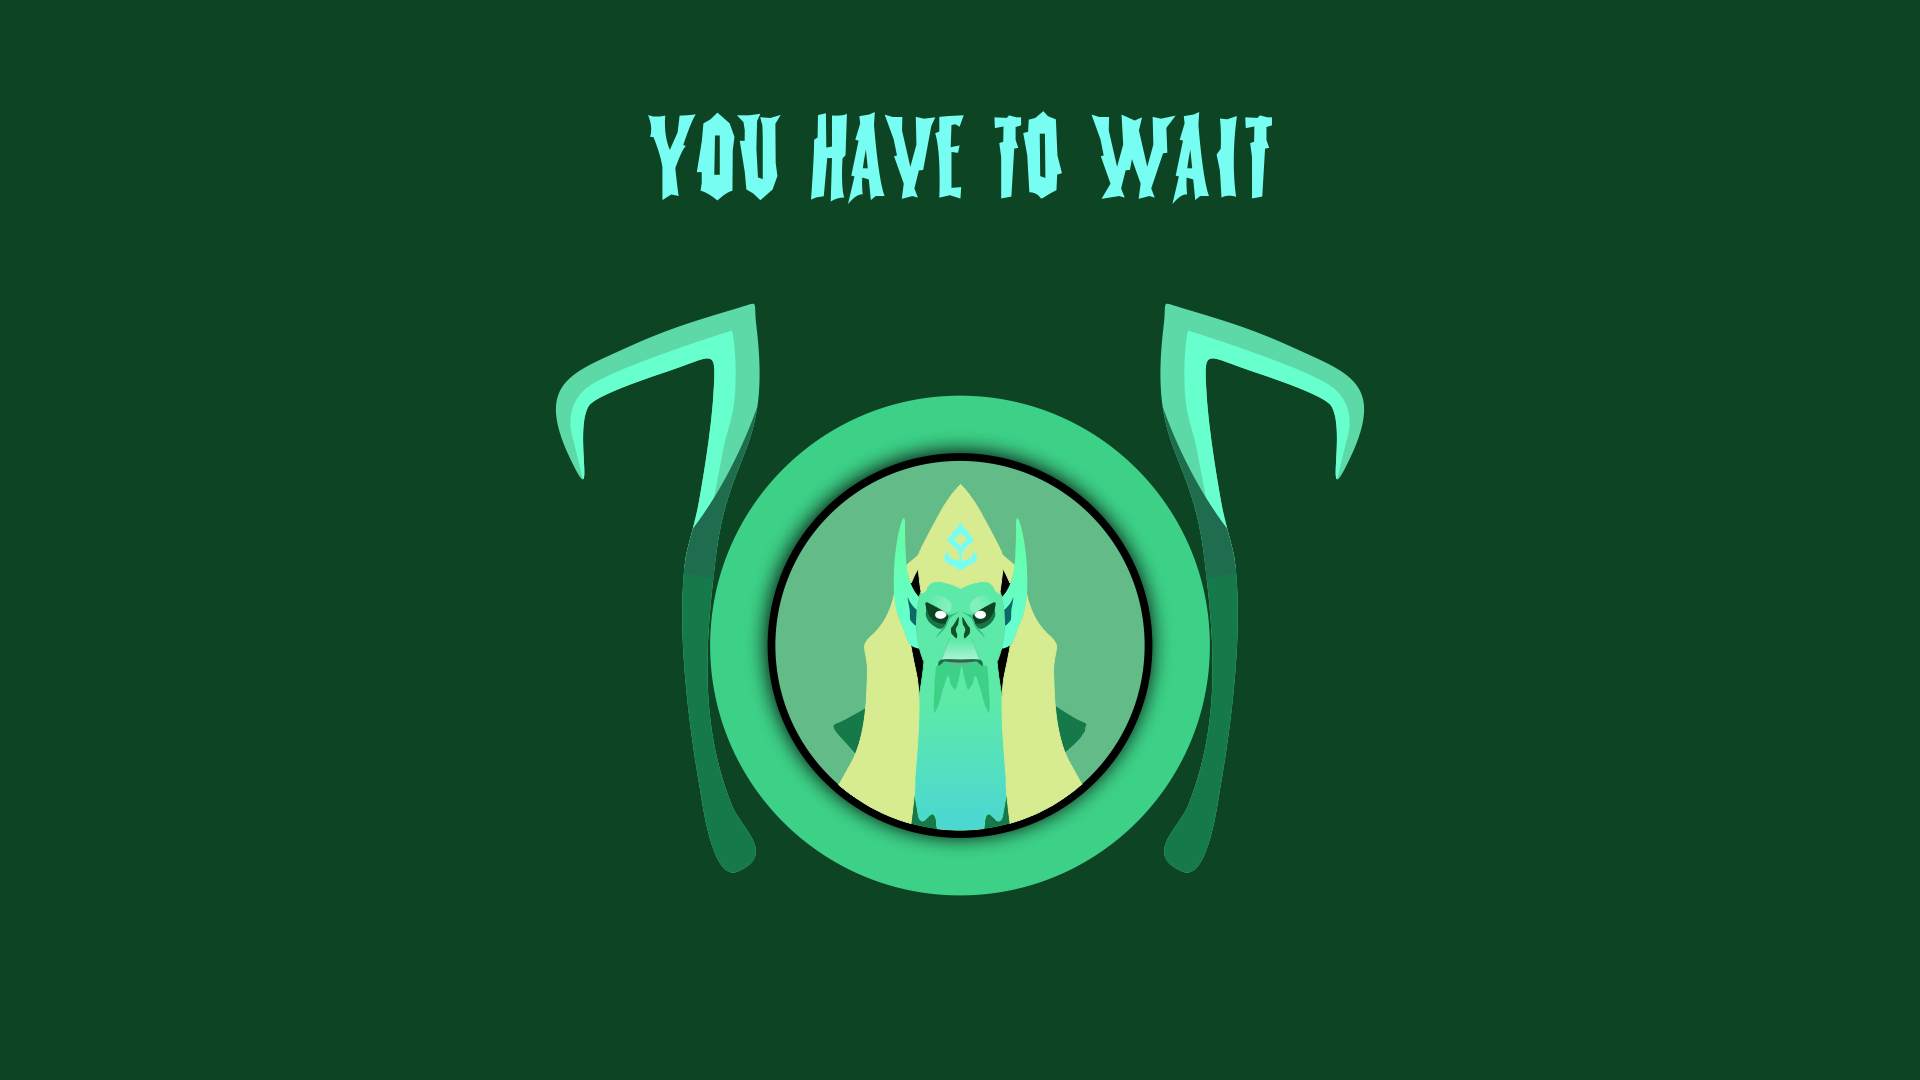 General 1920x1080 Dota 2 simple background minimalism green background quote